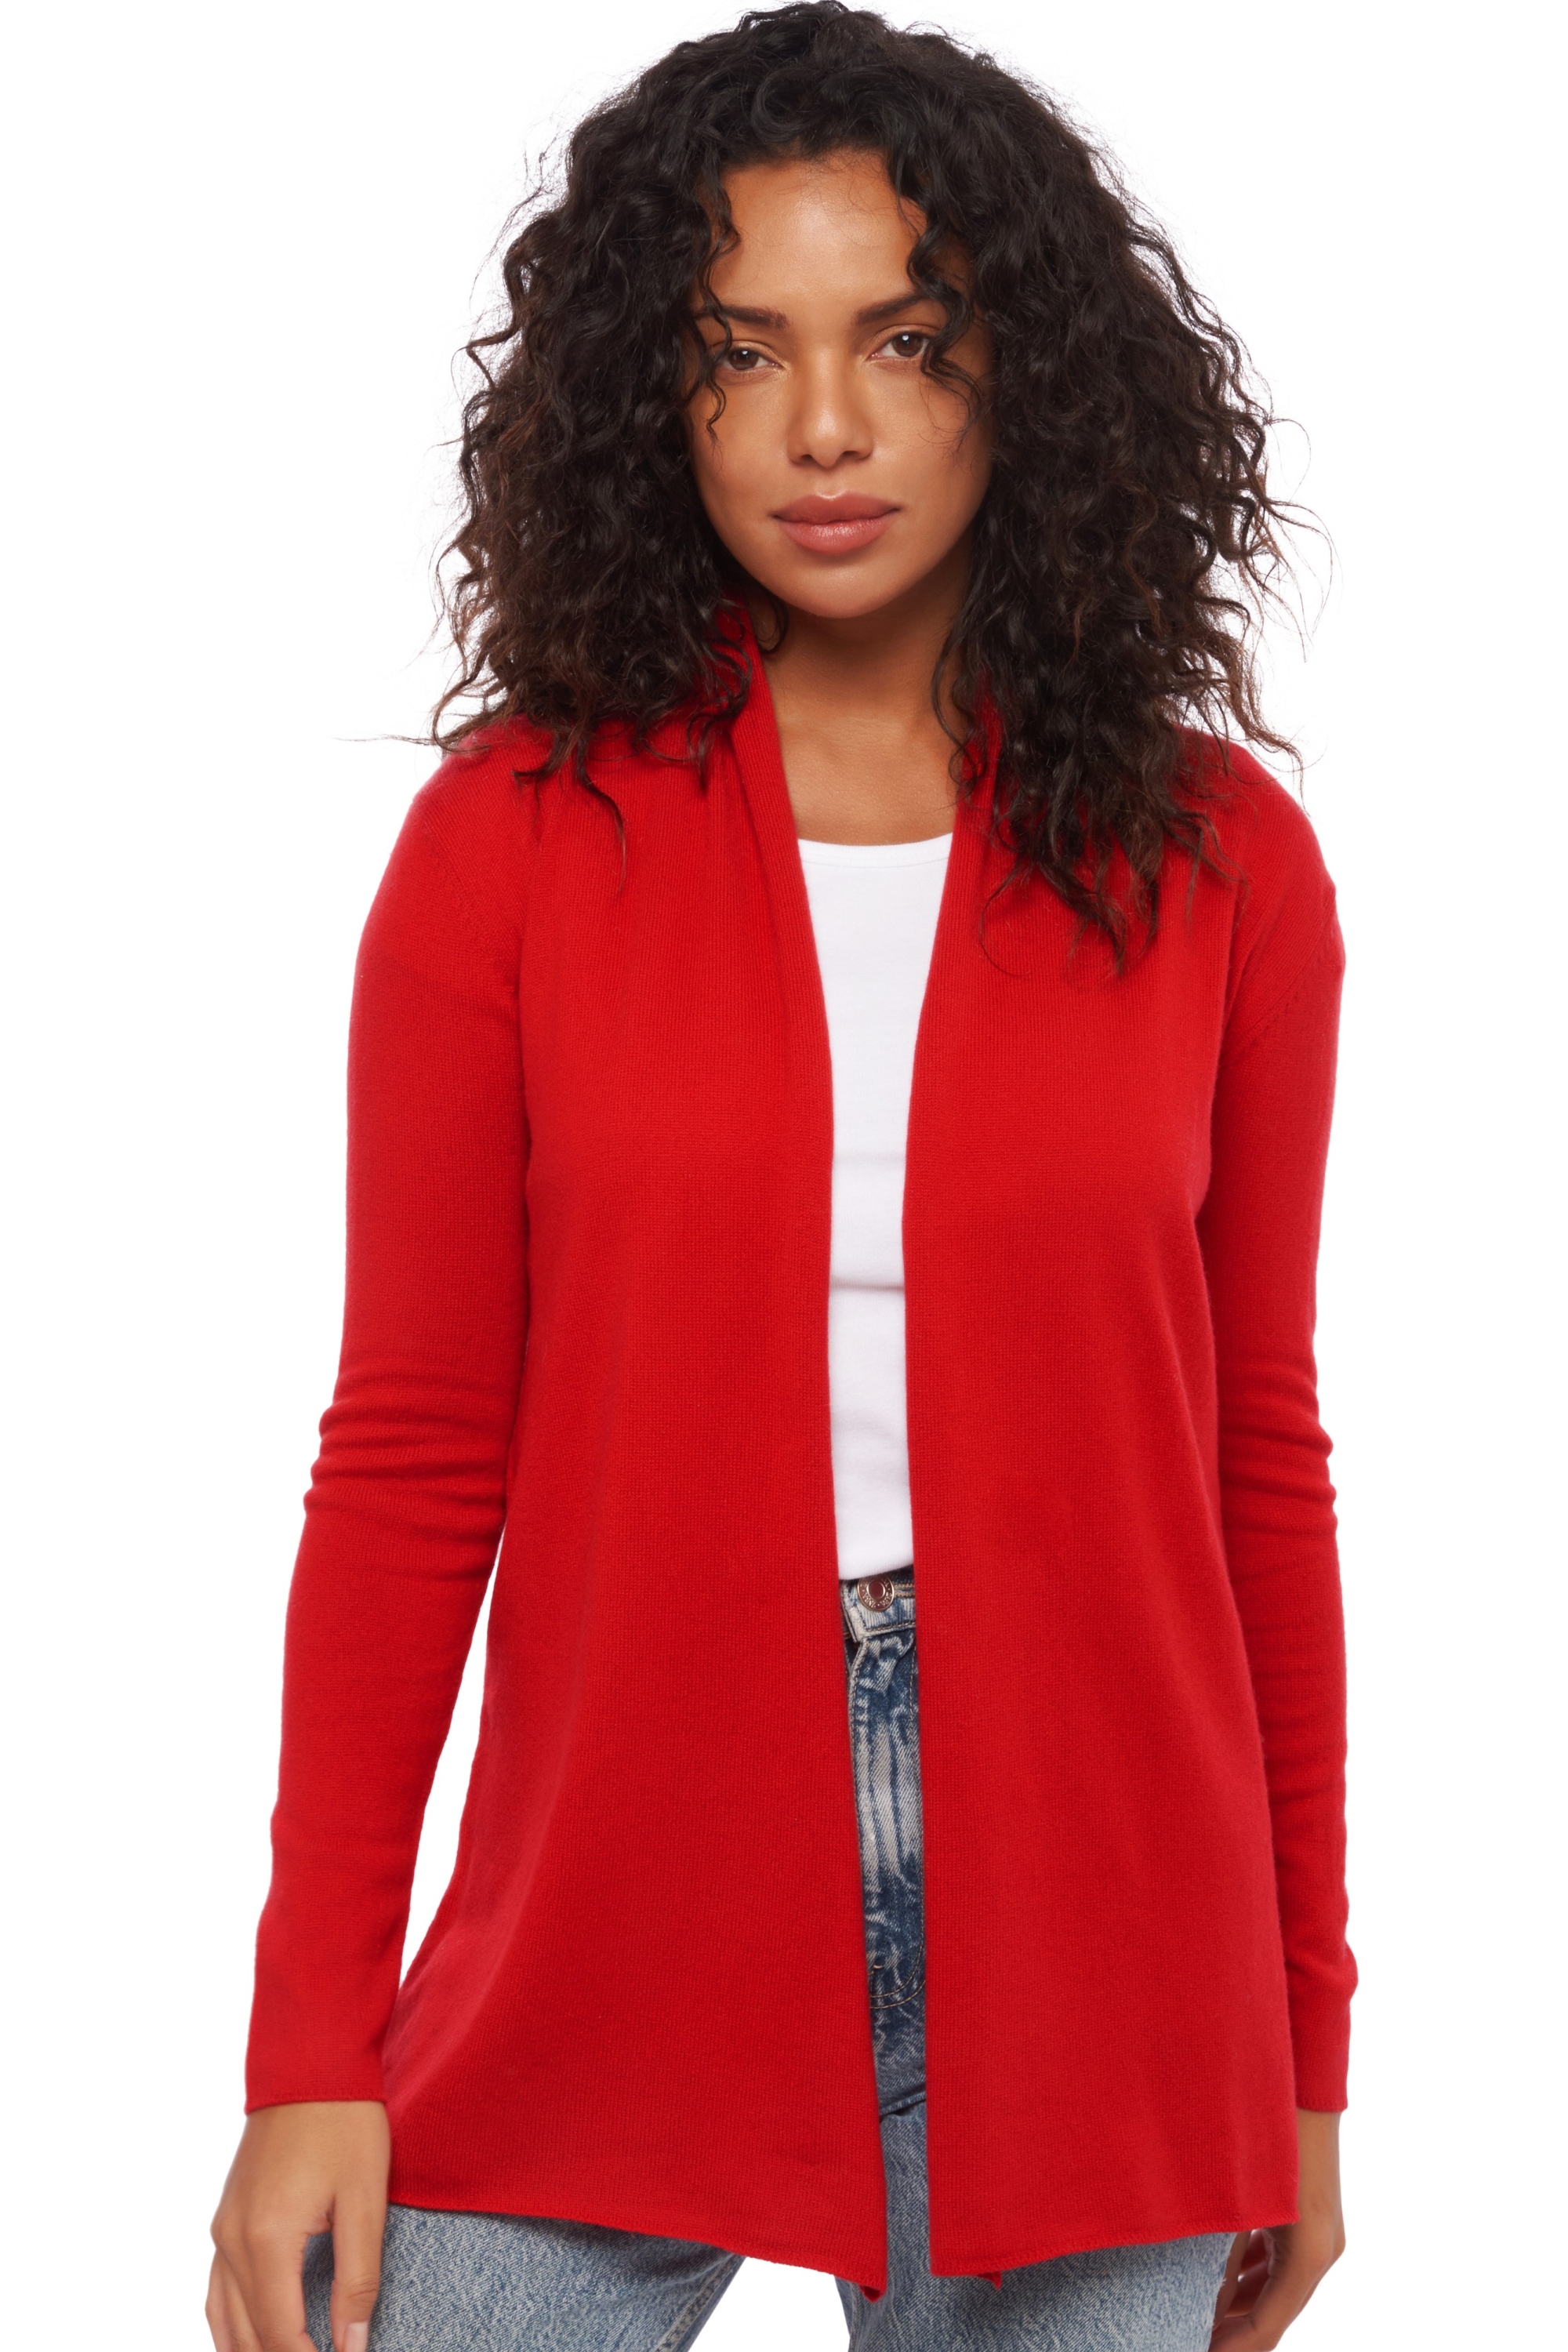 Cashmere ladies pucci blood red l